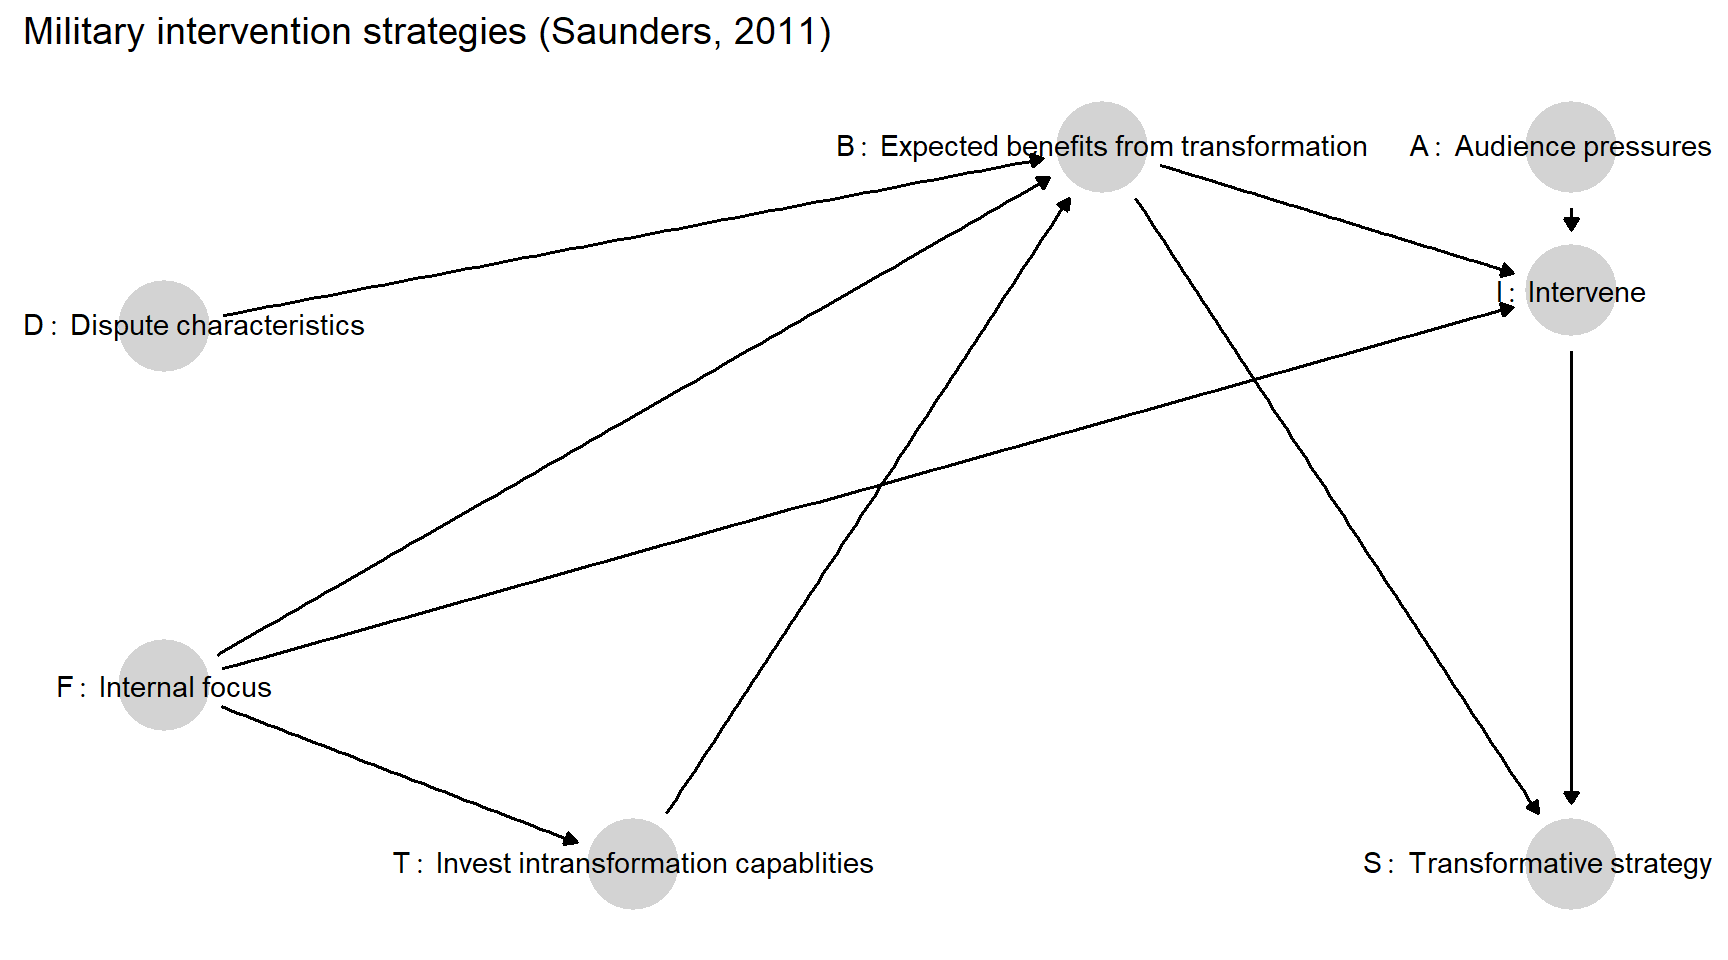 A graphical representation of Saunders' (2011) argument.